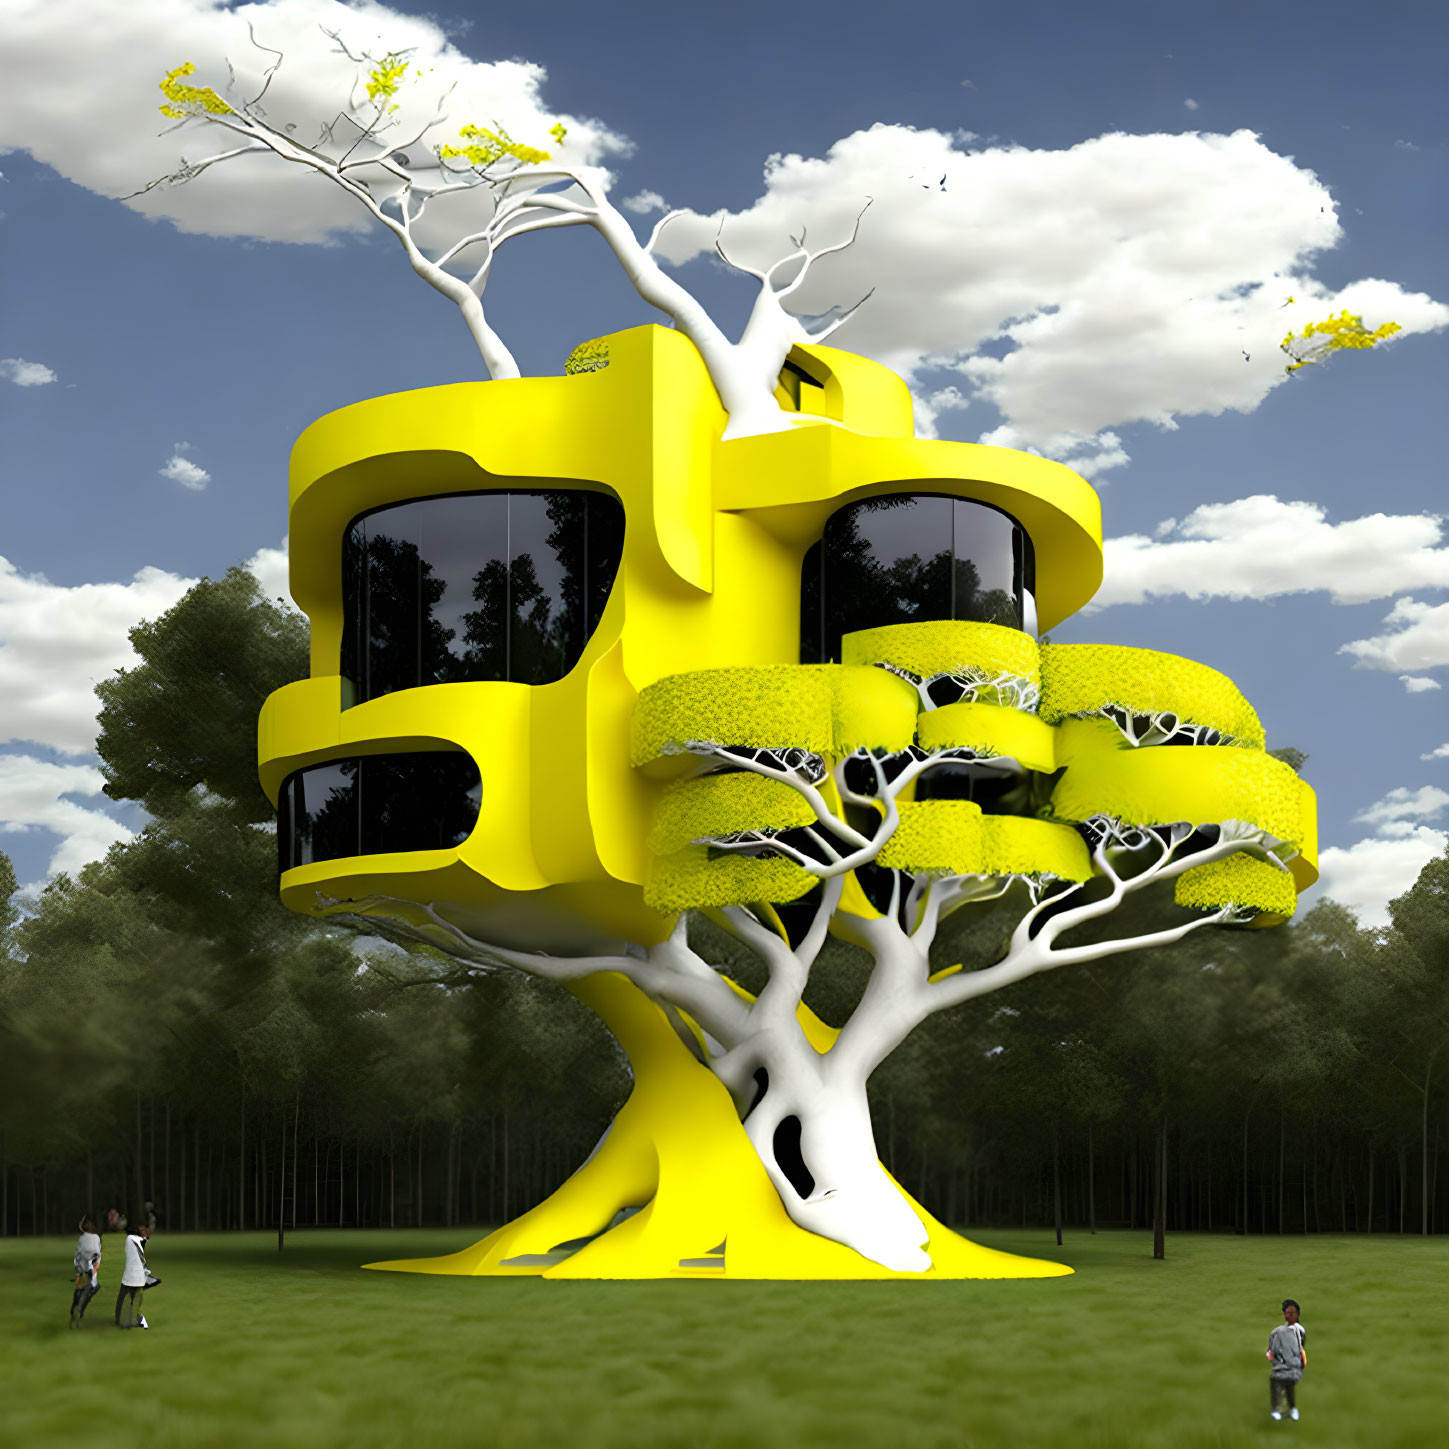 Yellow tree-shaped building with large windows in green meadow with people for scale